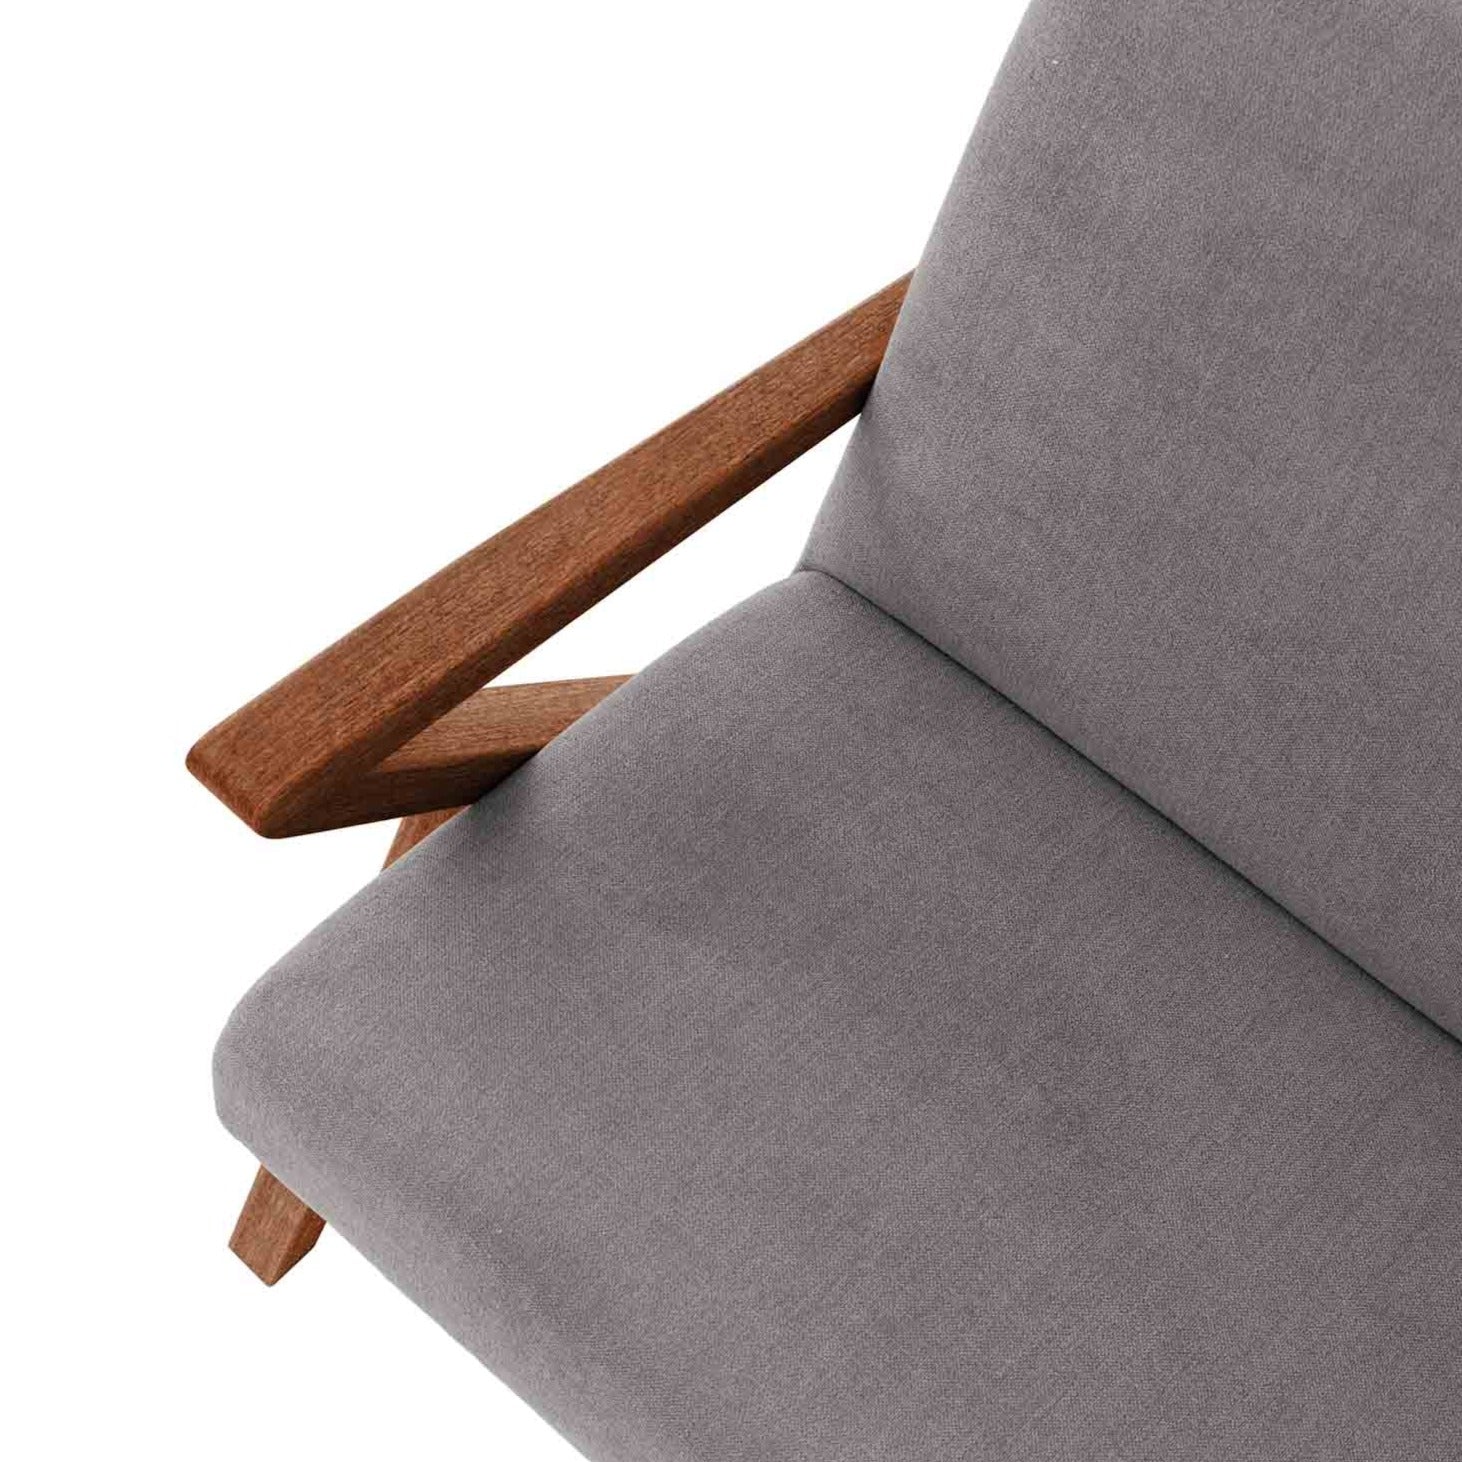  2 Seater Sofa, Beech Wood Frame, Walnut Colour grey fabric, detail top view